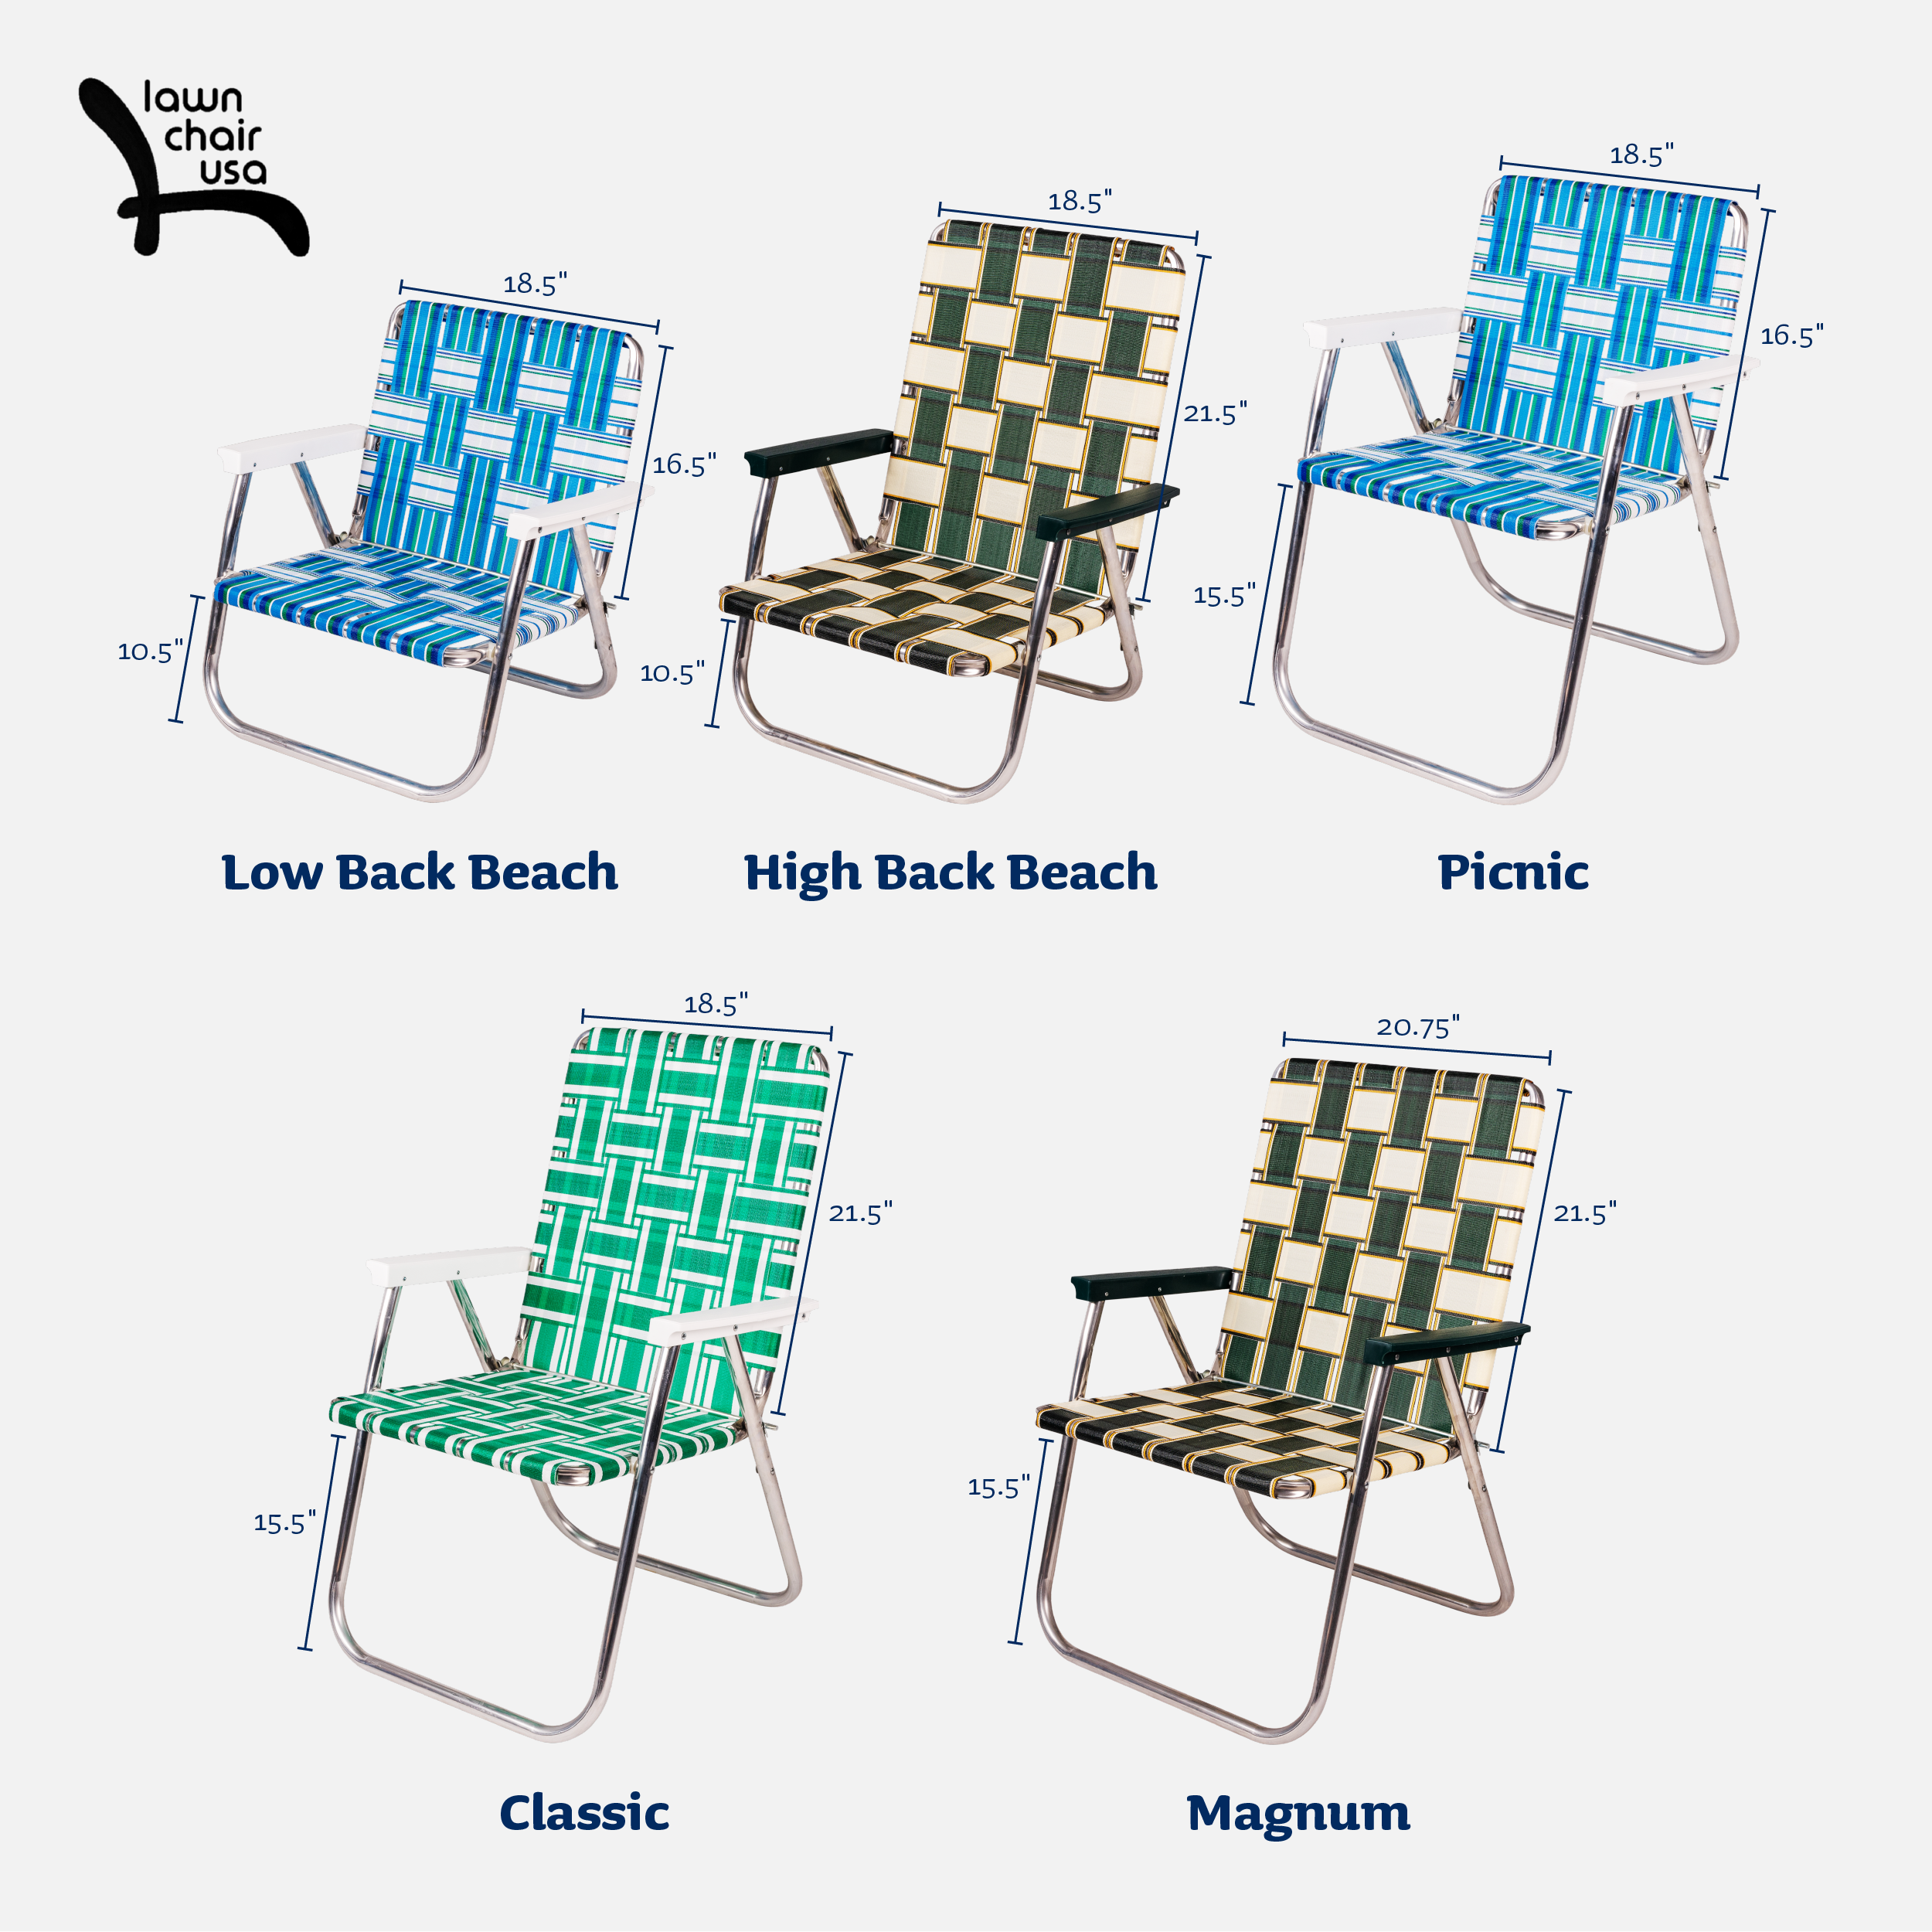 Lawn chair USA | Black and White Webbing | Crafted from UV-resistant polypropylene | Durable straps offer stylish replacement options for your outdoor seating | Long-lasting comfort and support - image 4 of 7